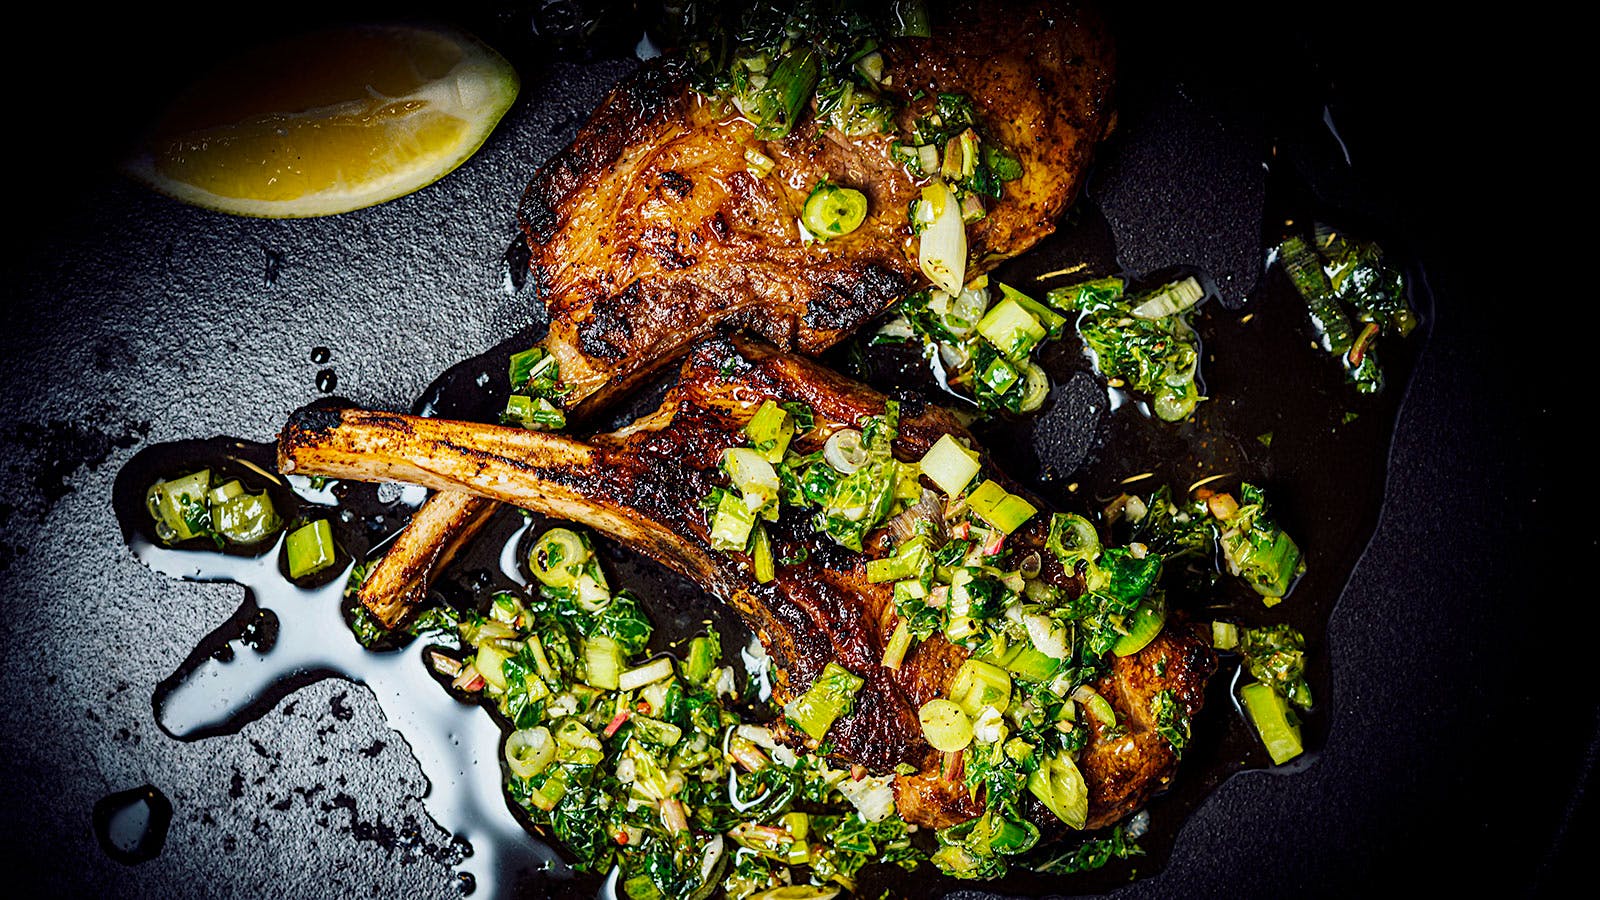 Nik Sharma’s Lamb Chops with Scallion-Mint Salsa and Cucumber-Corn Salad for Memorial Day